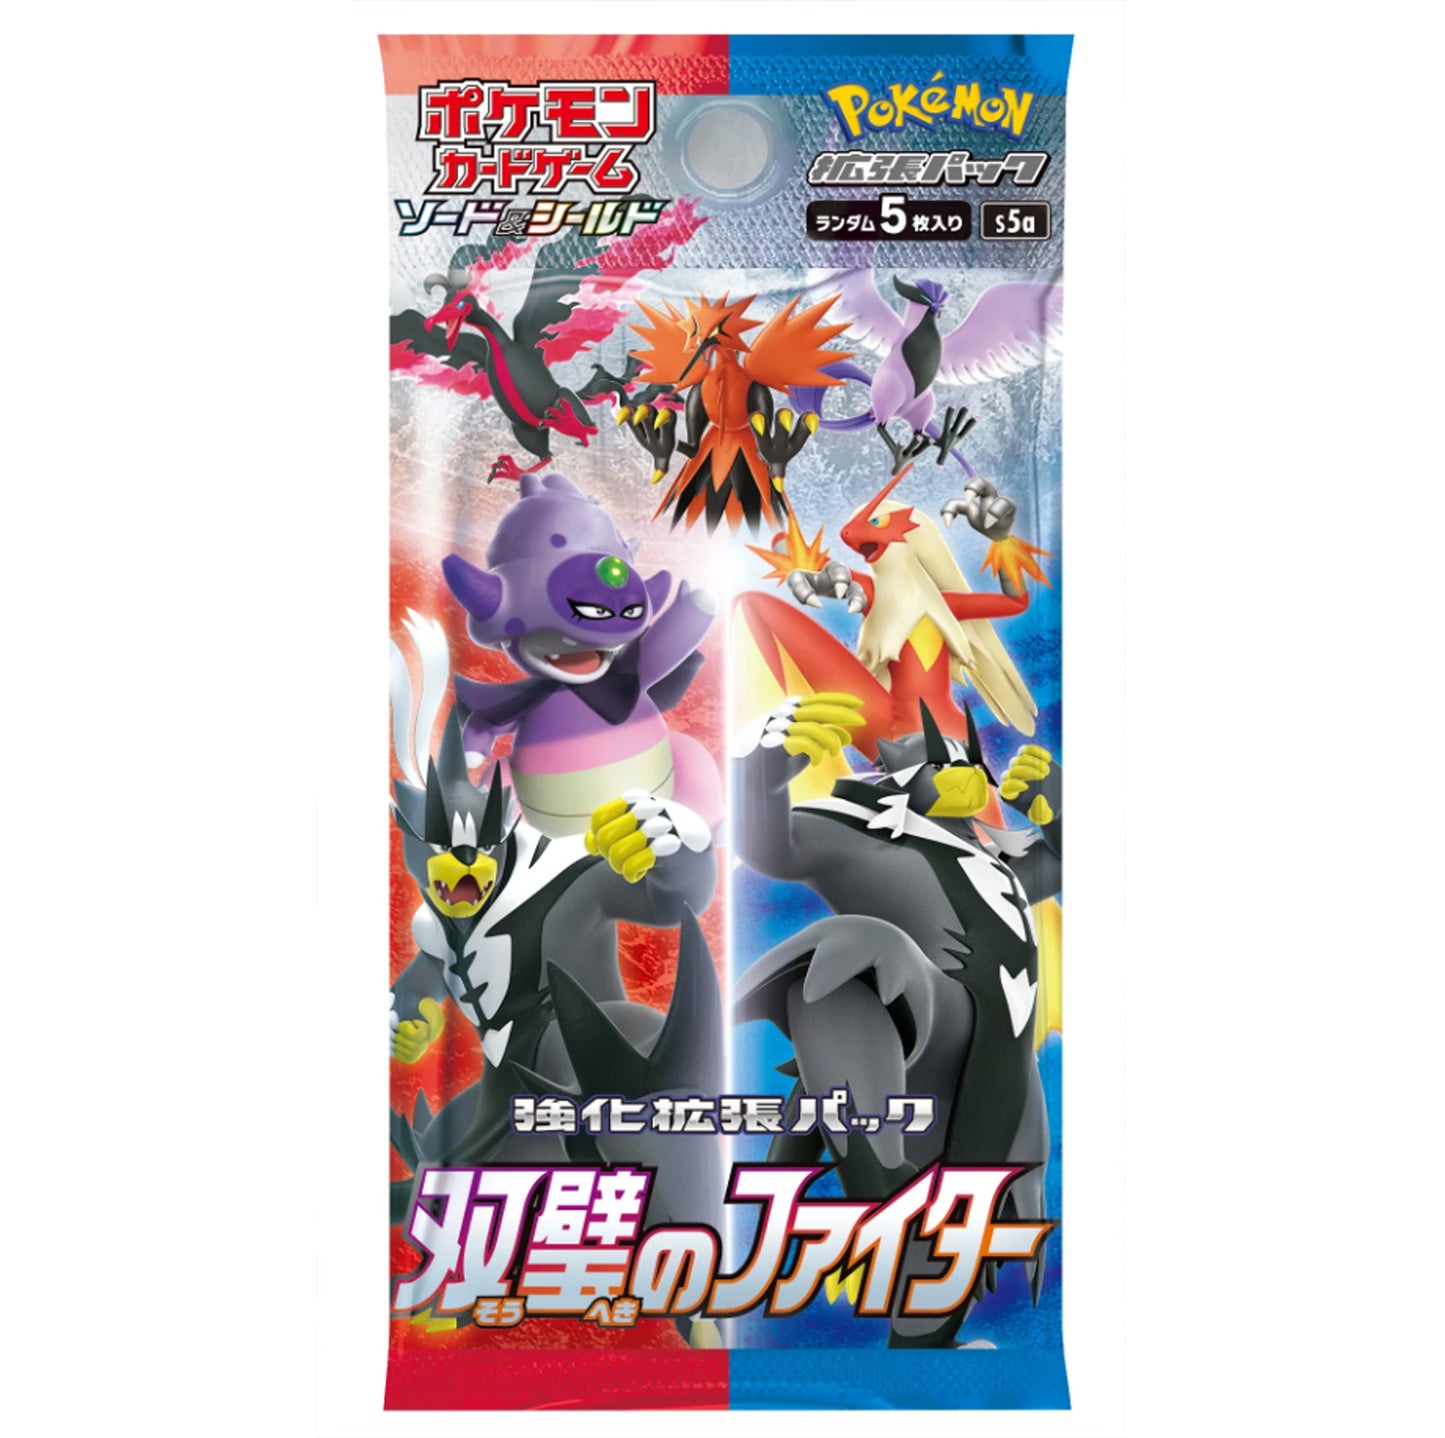 ABOUT POKEMON S5A MATCHLESS FIGHTERS JAPANESE